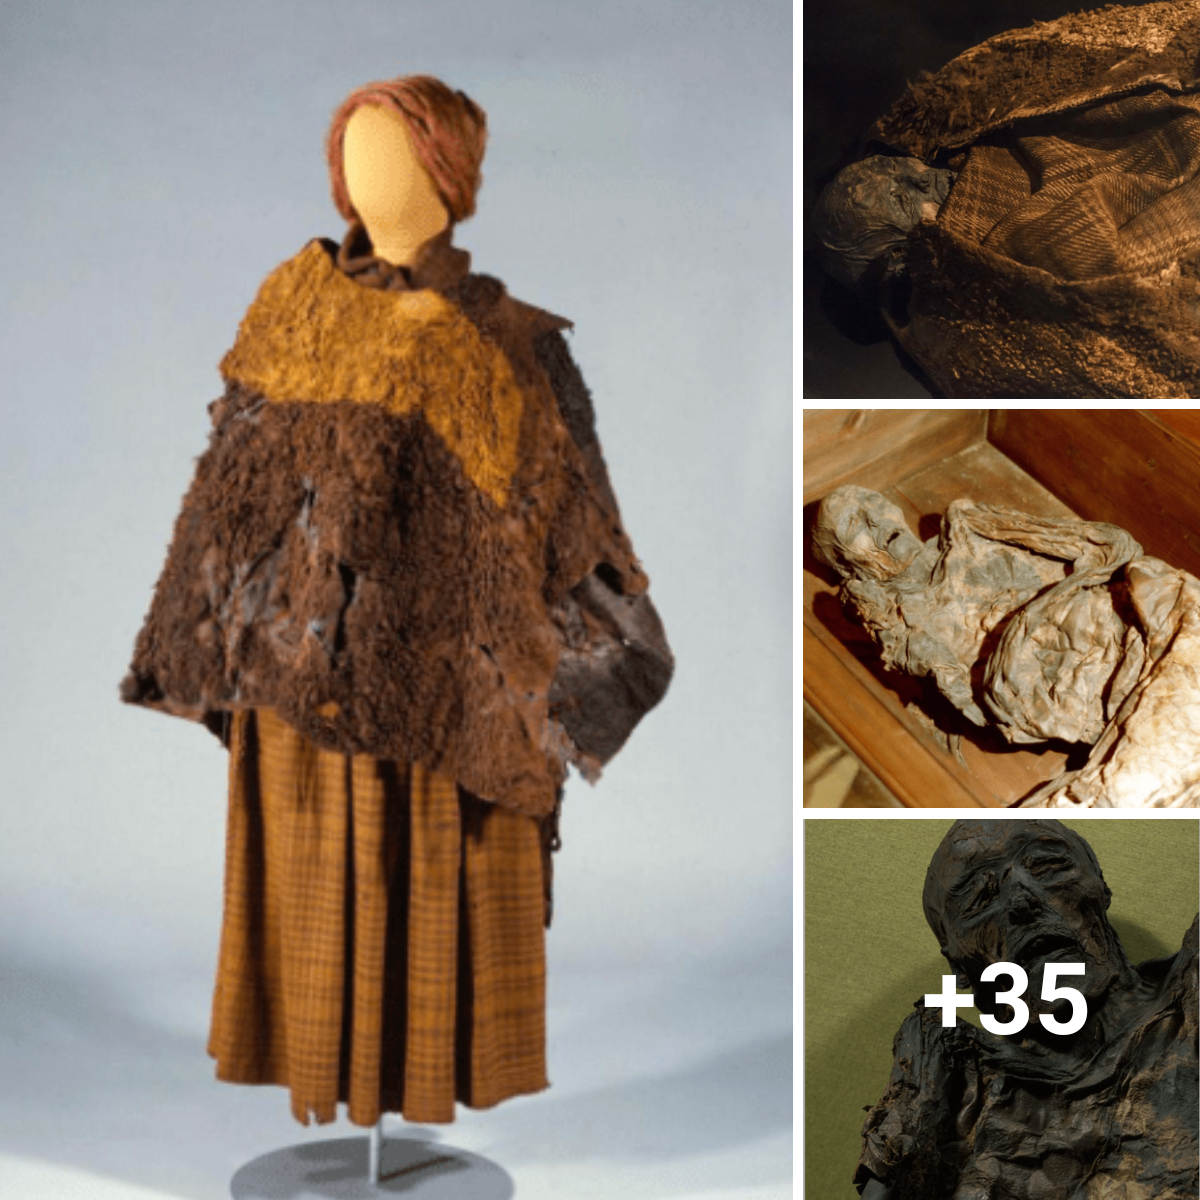 One of the most elegantly attired and best-preserved bog bodies is The Huldremose Woman.